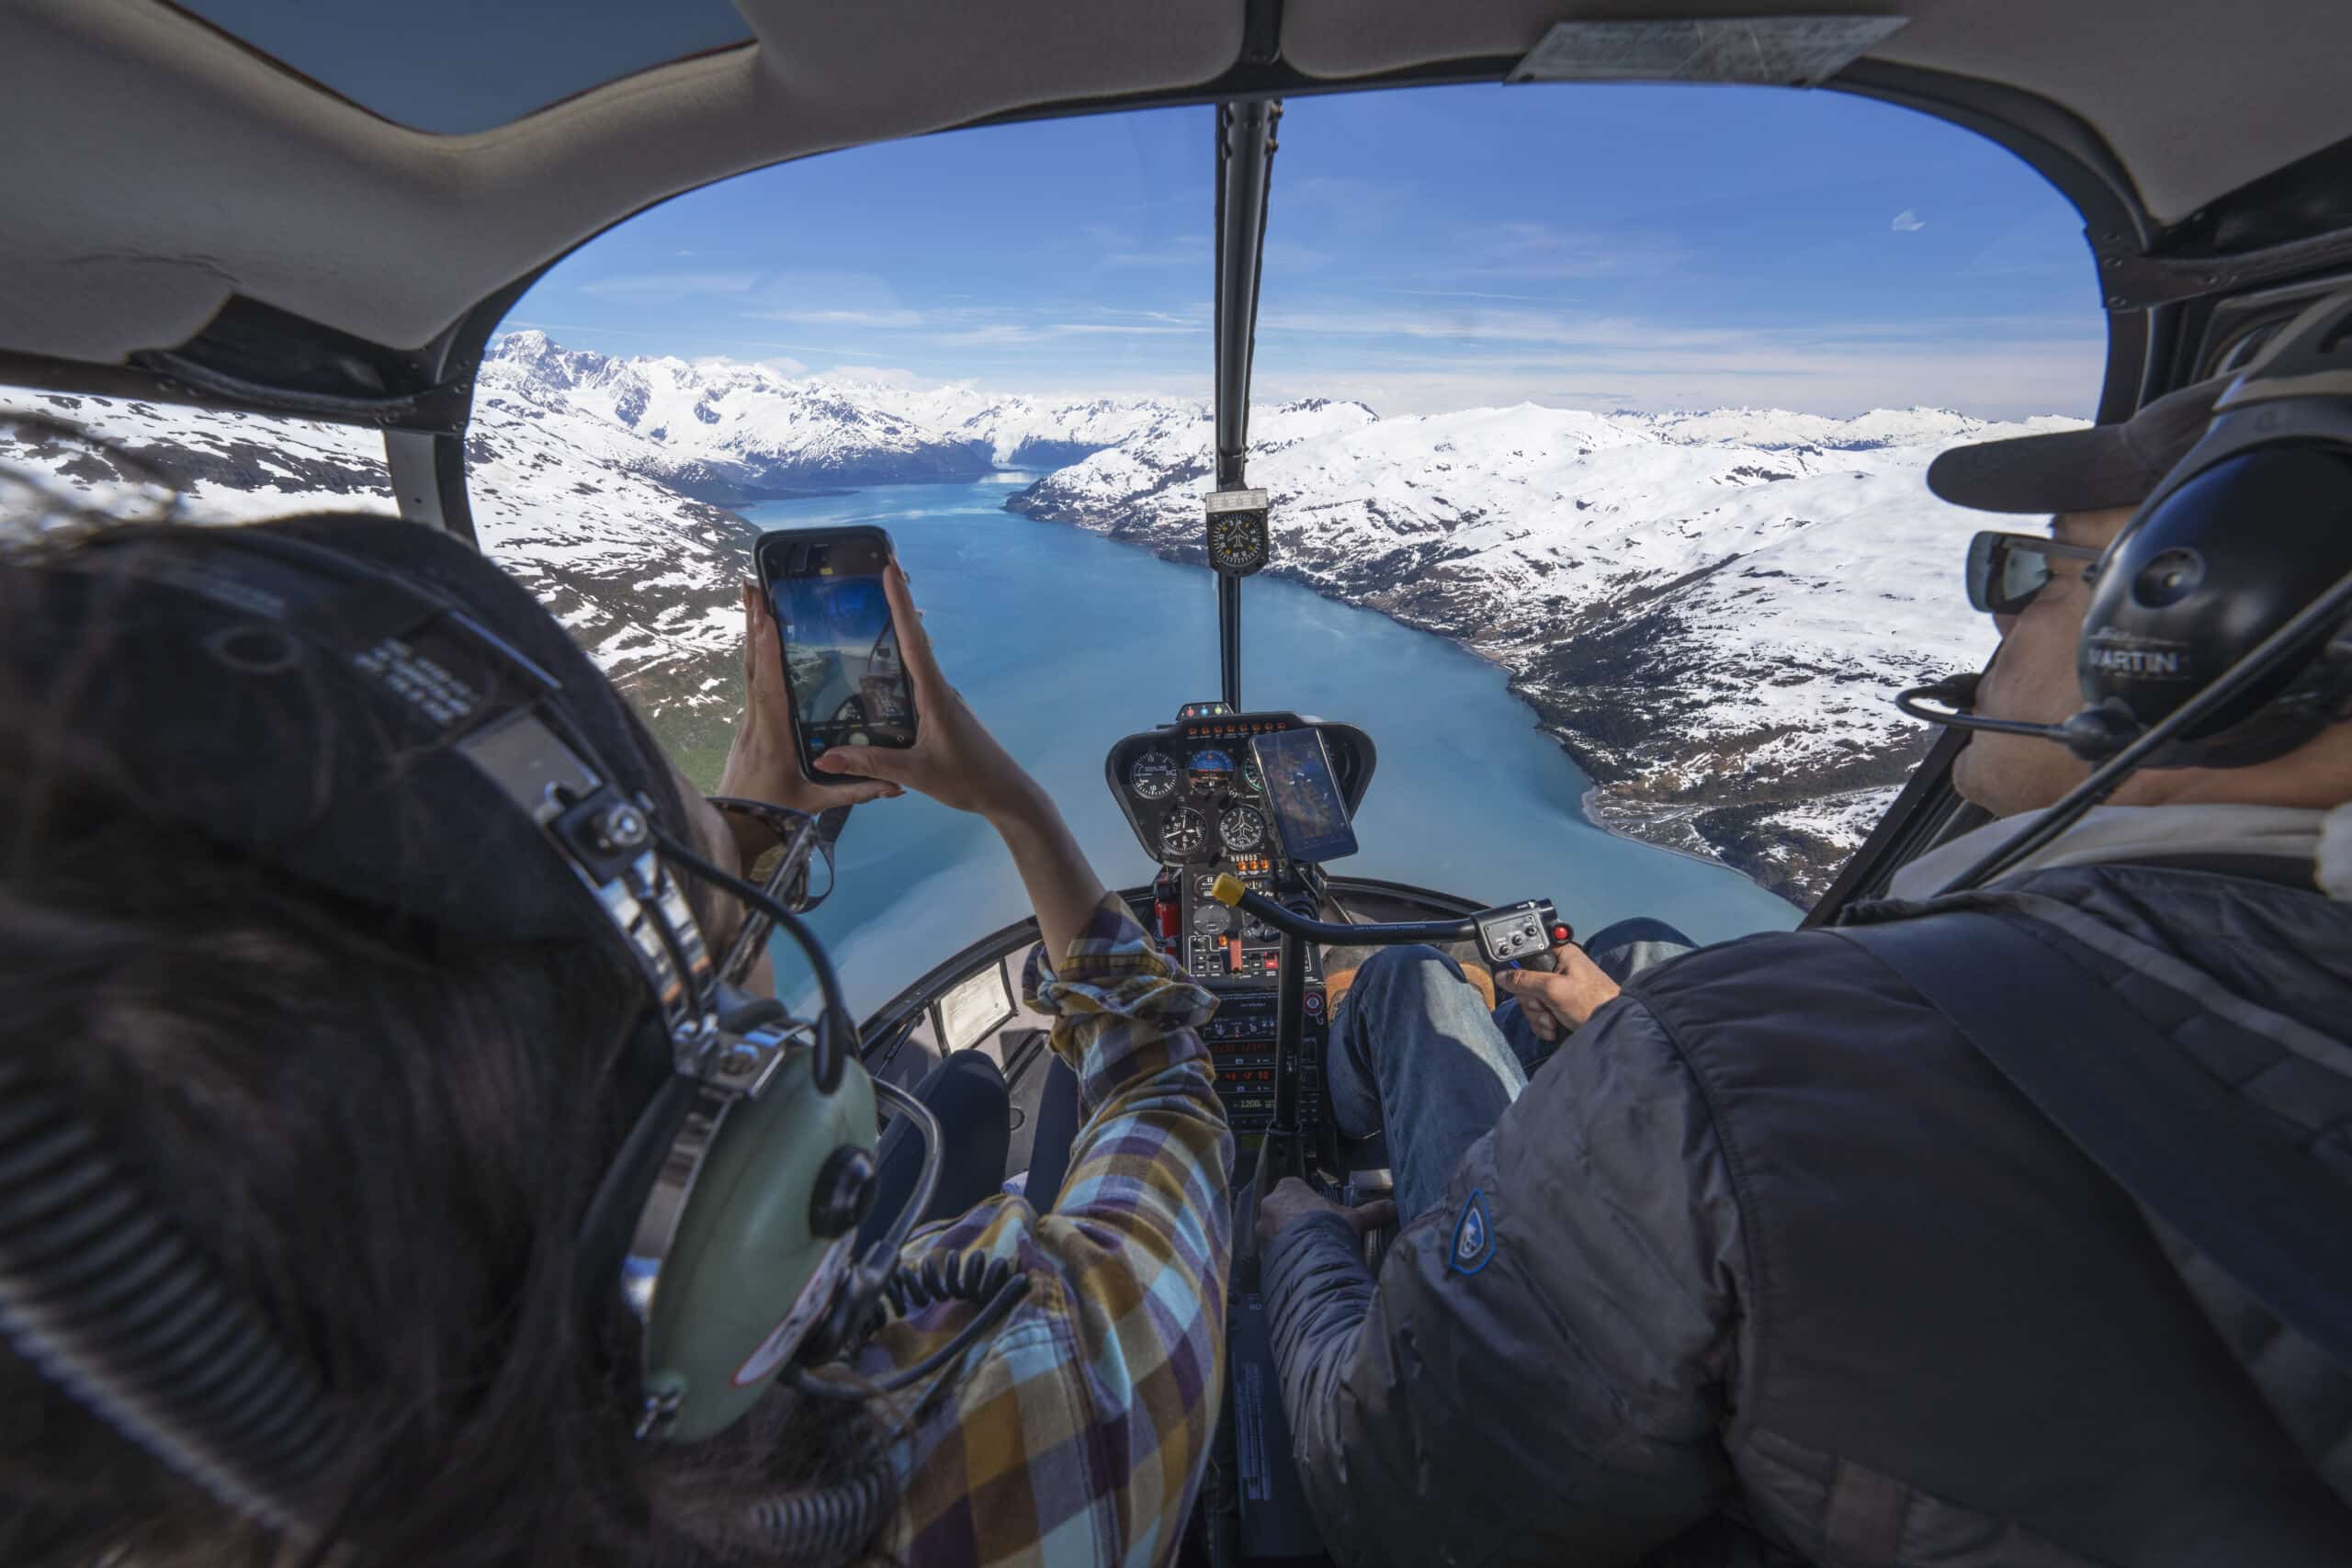 Land, Air, and Sea: The 3 Best Ways to See and Experience Alaska